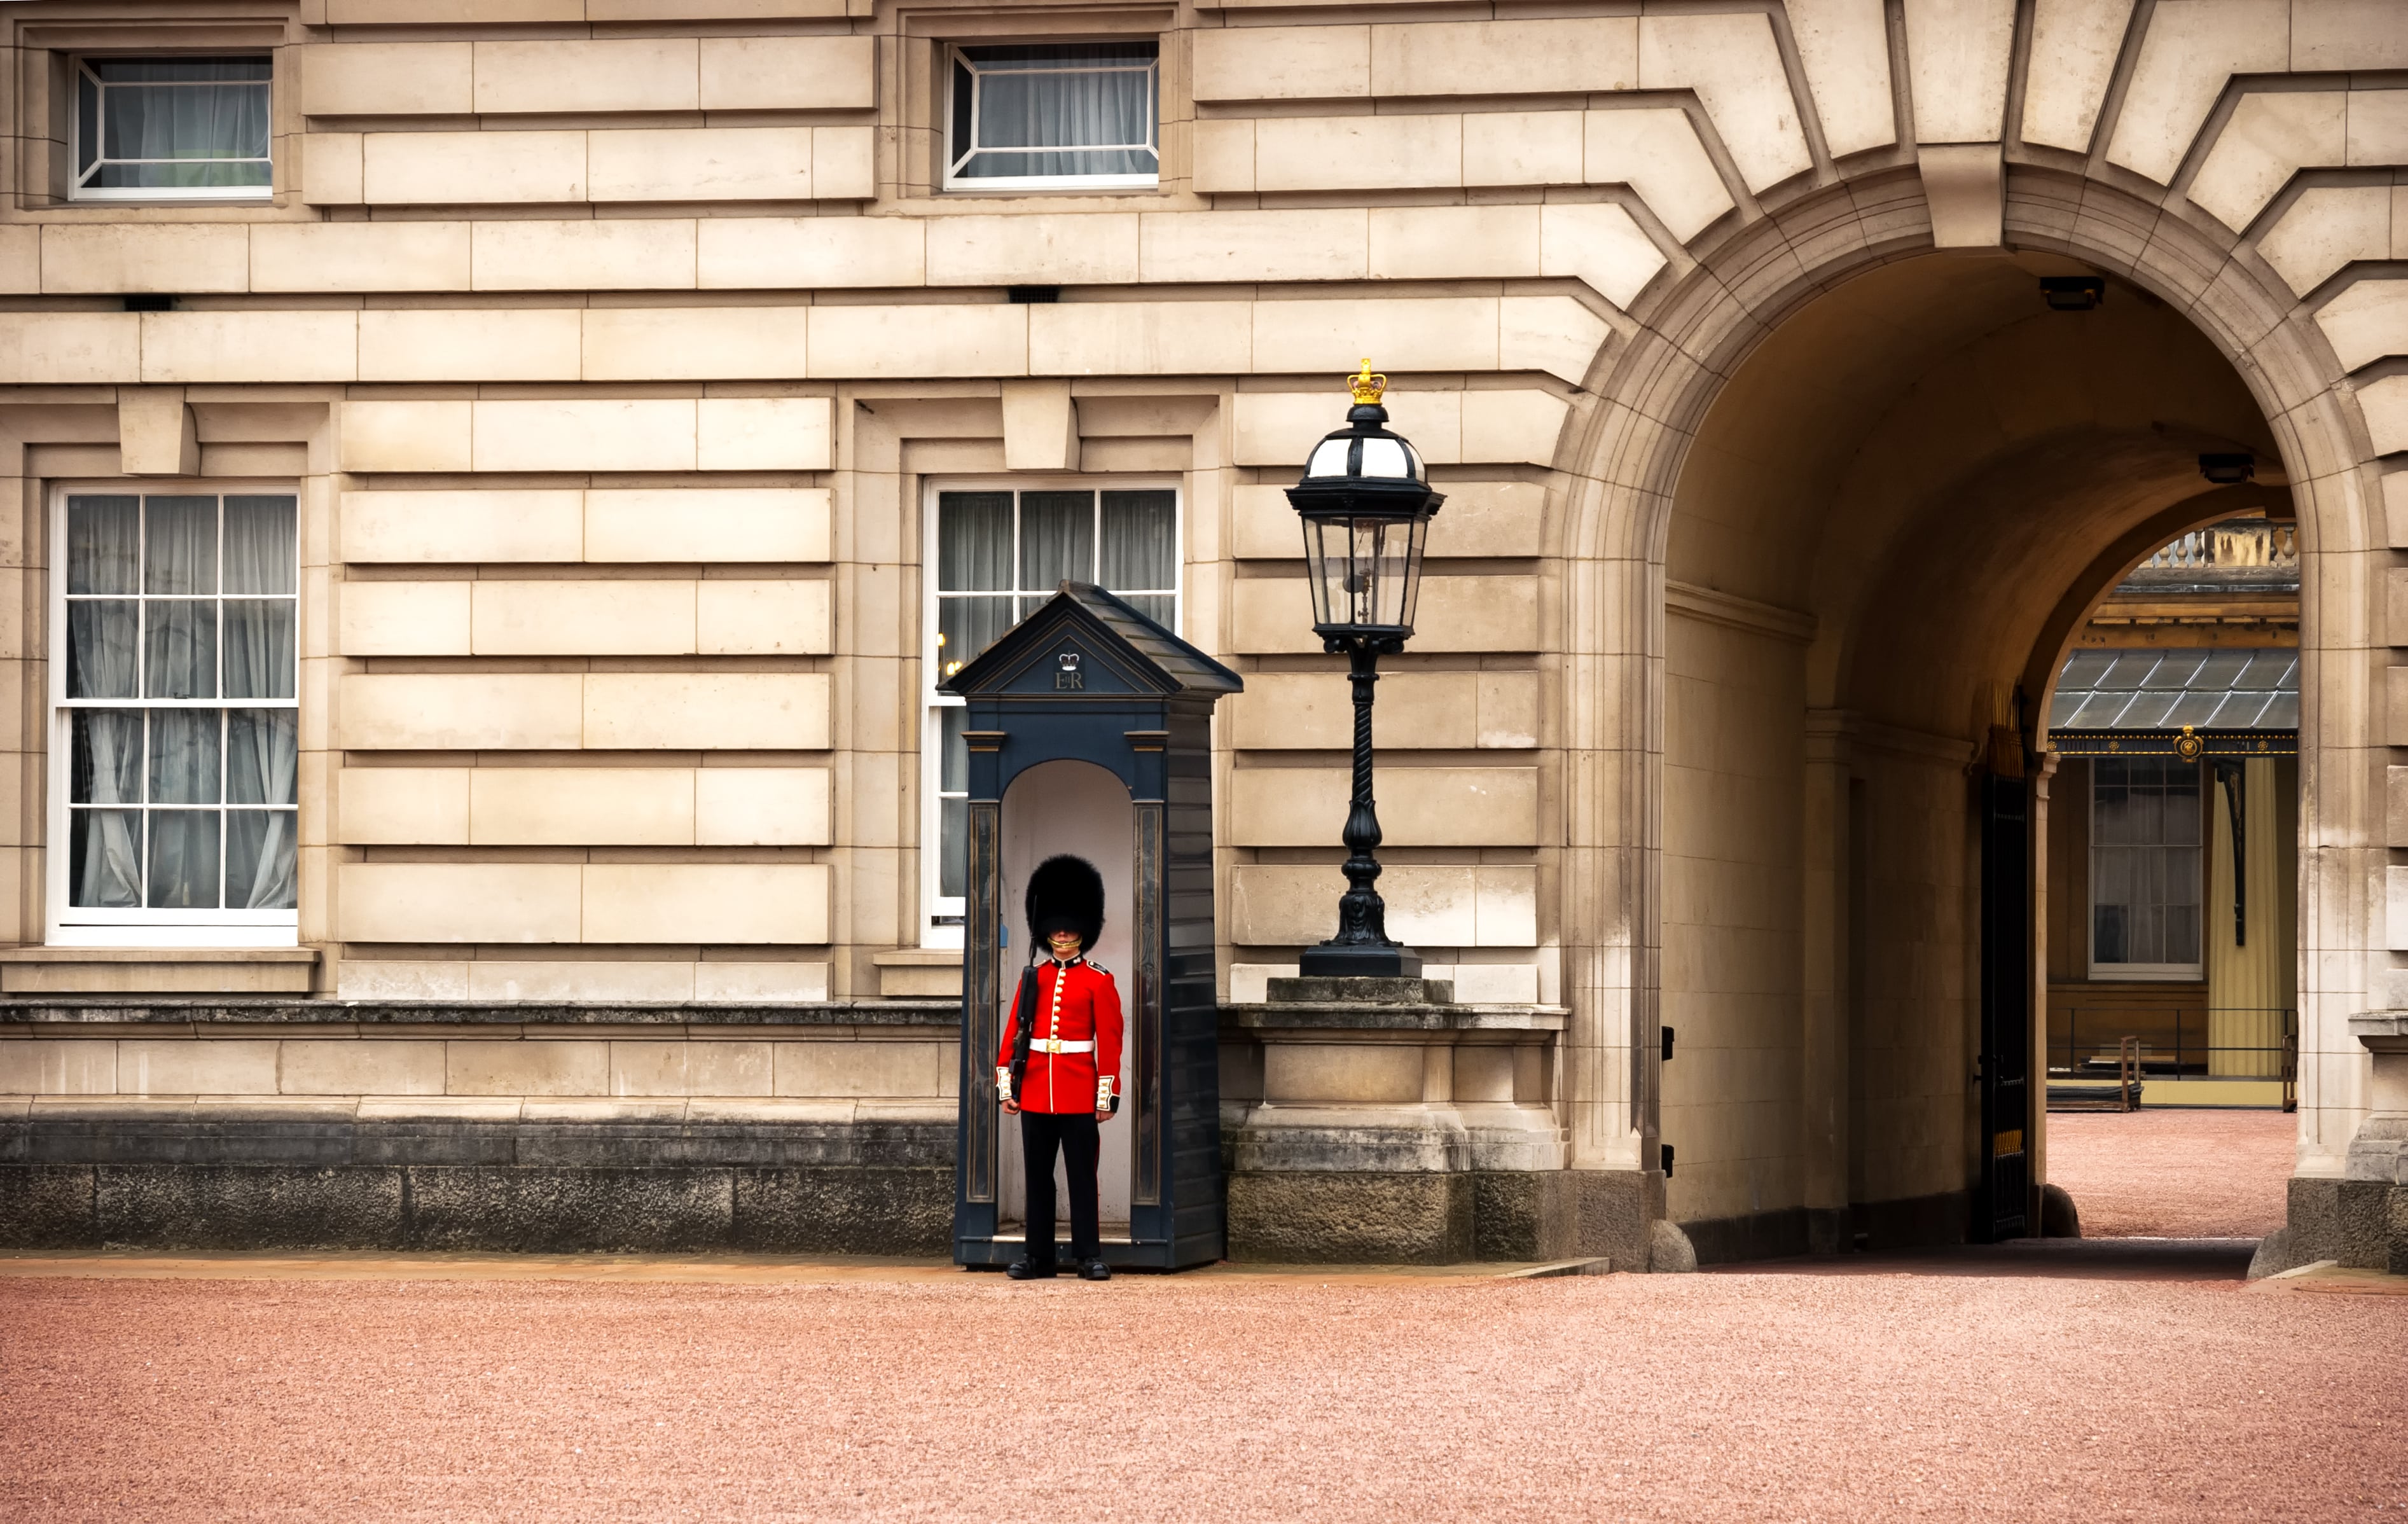 Sentry guard in his station at Buckingham Palace